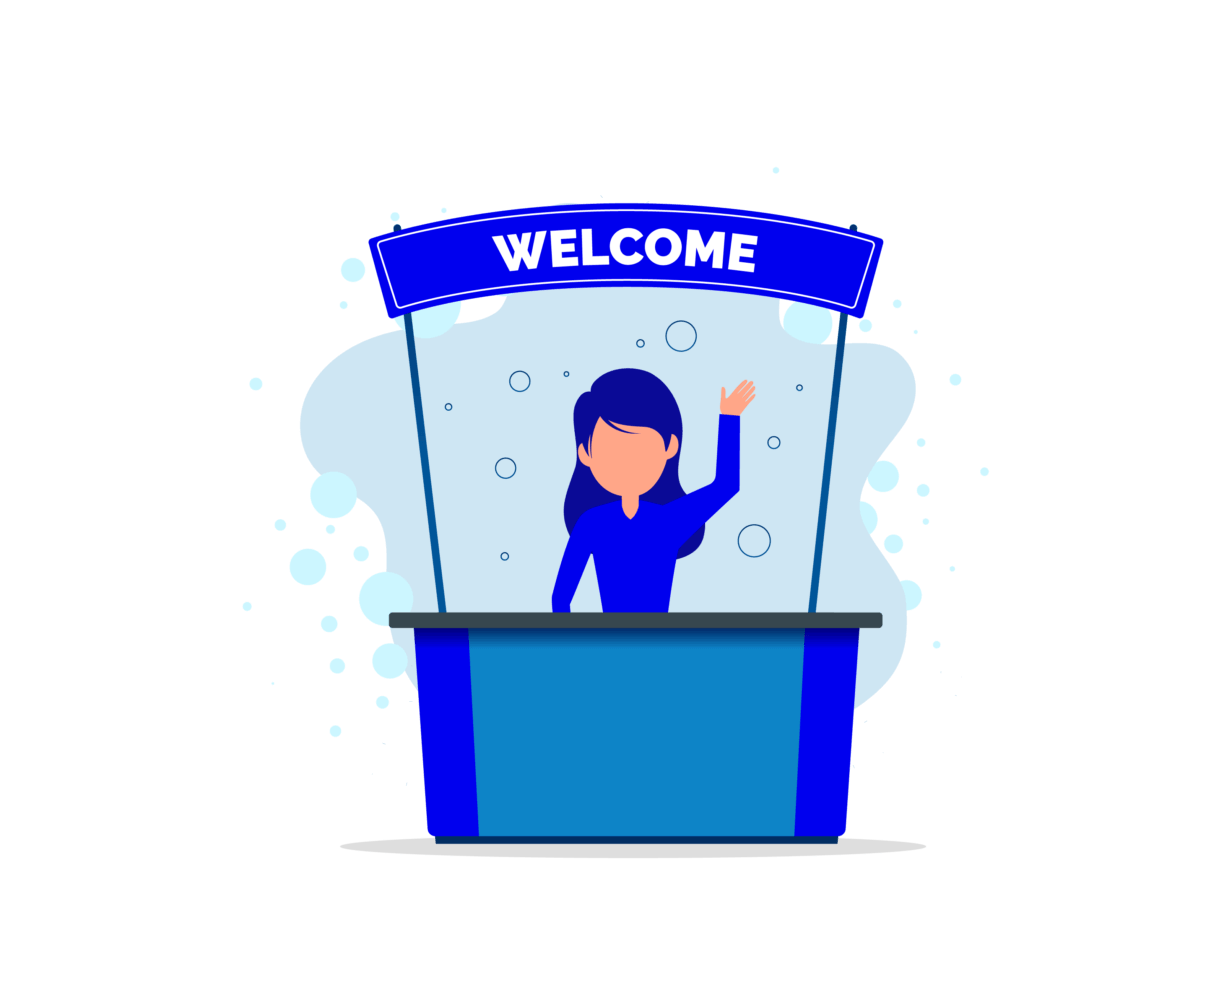 Digital image of blue stand with a person waving. Sign says Welcome